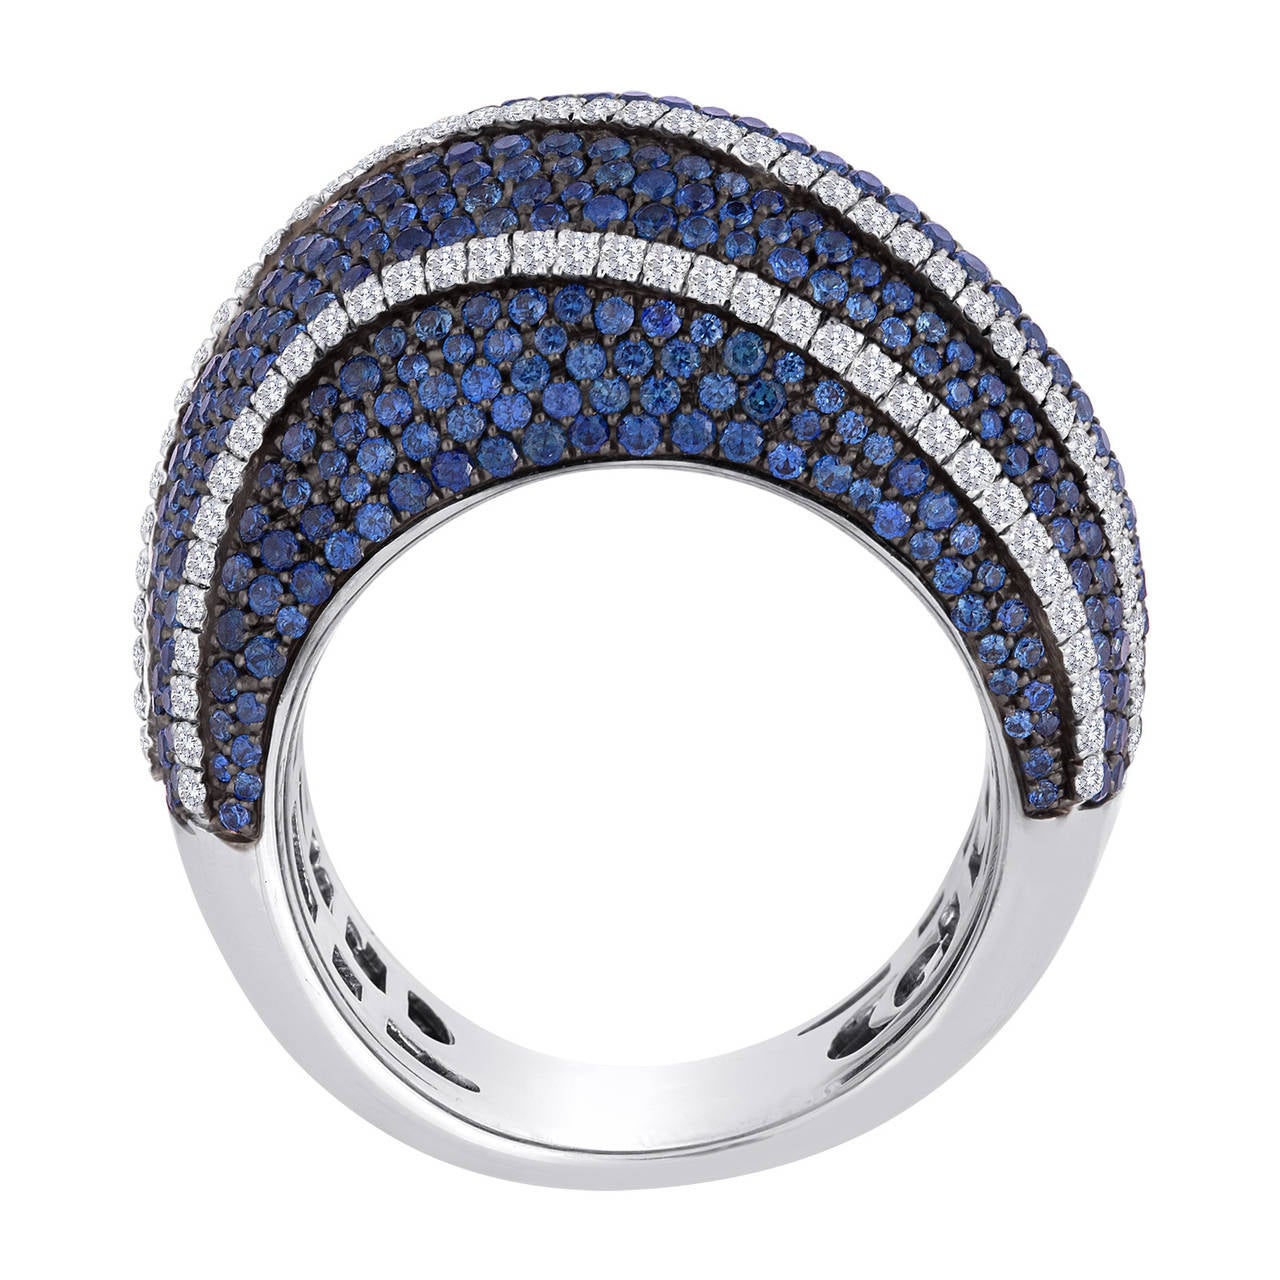 This piece consists of multiple rows of blue sapphires and white diamonds, arranged in an elegant wave-like pattern. The total weight of the diamonds is 1.25 cts. The total weight of the sapphires is 1.68 cts. All stones are pave set in 18k white